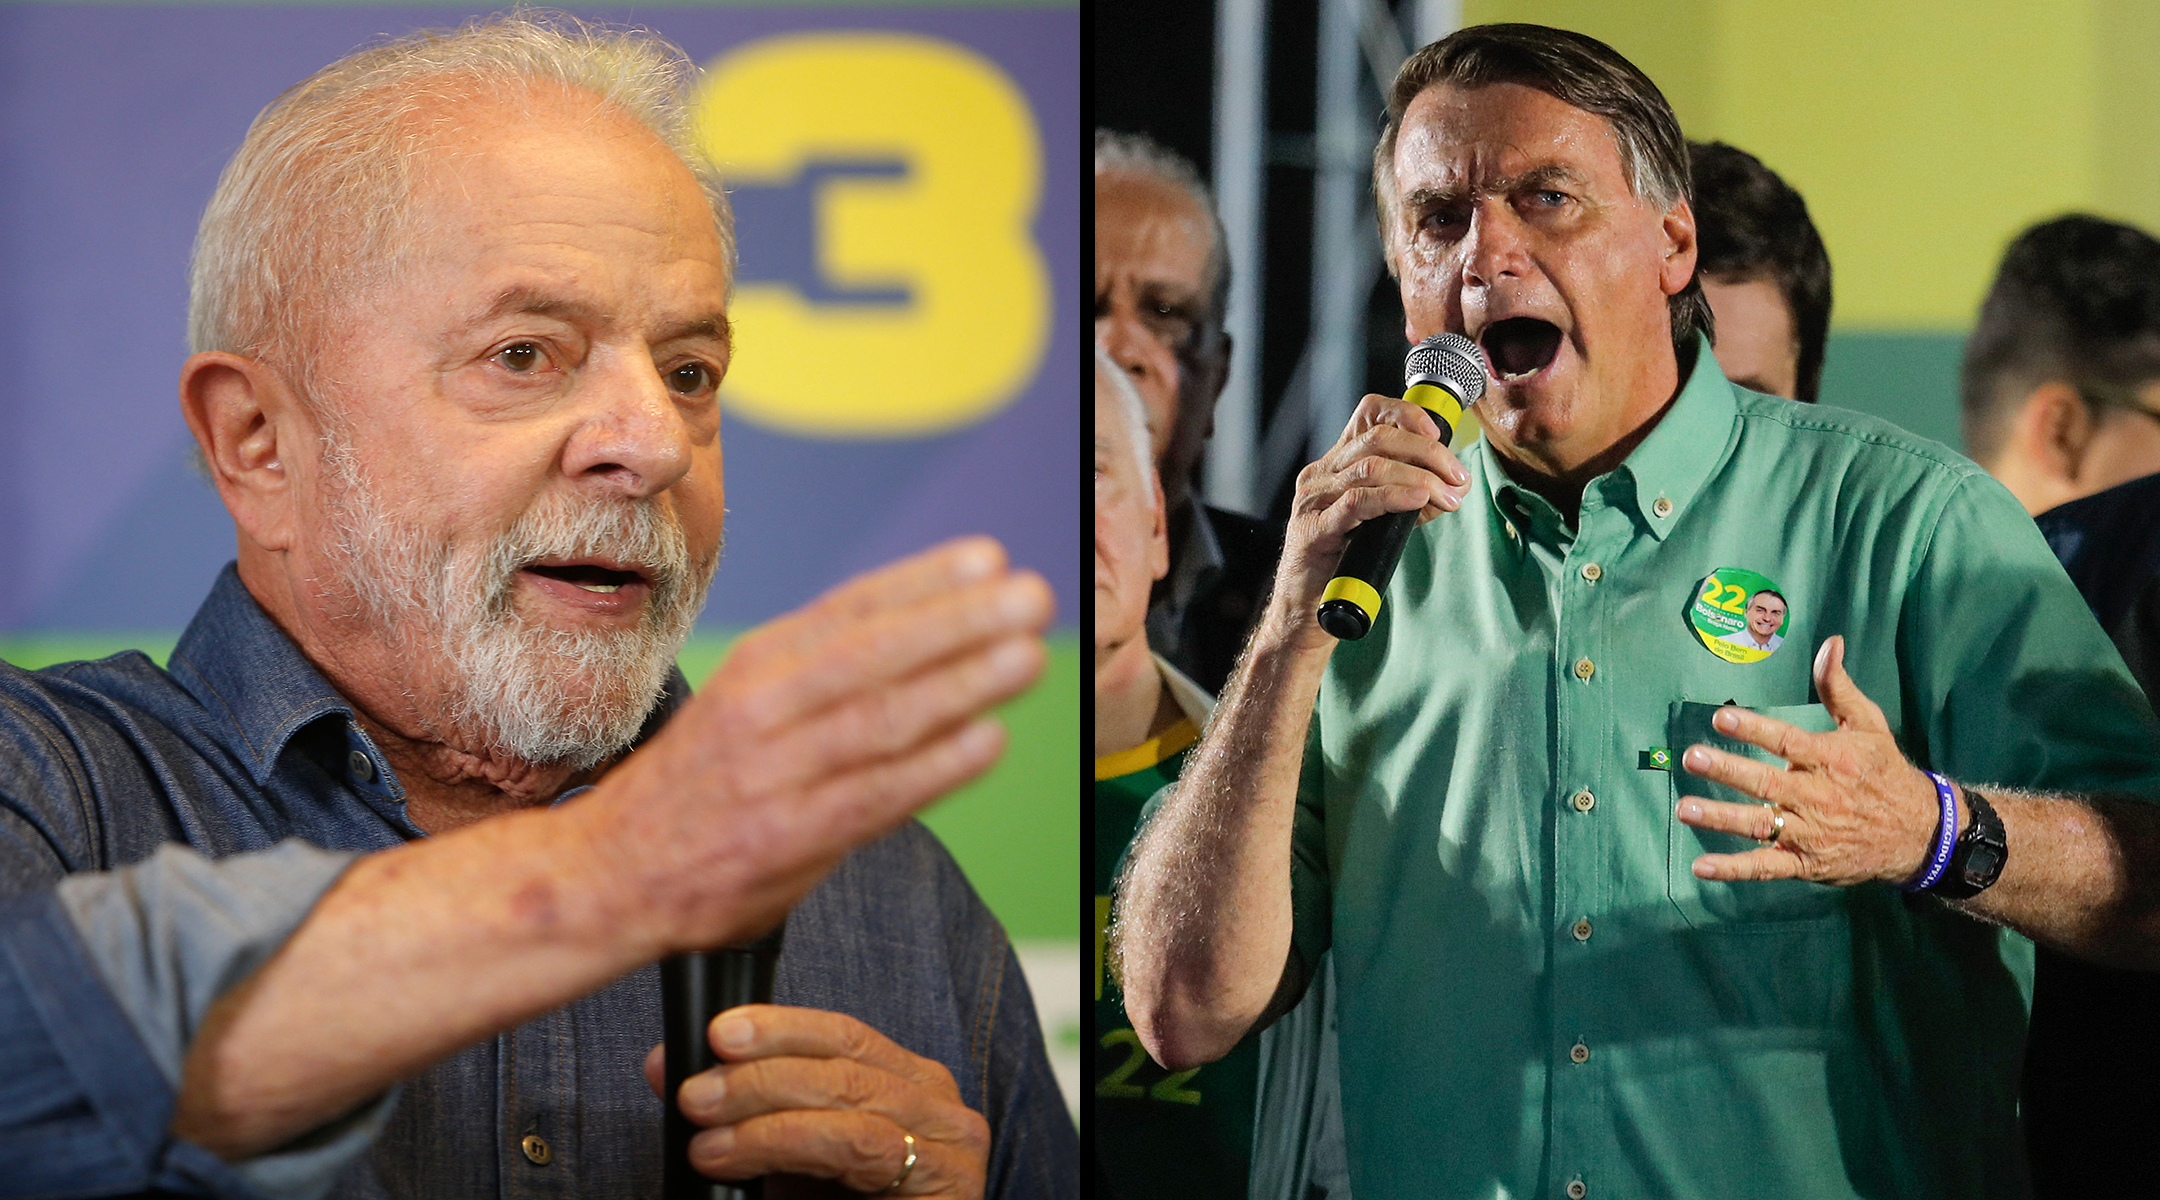 Brazilian President Jair Bolsonaro, right, and presidential candidate for the leftist Workers Party, Luiz Inacio Lula da Silva, left, and Brazilian President and re-election candidate Jair Bolsonaro, right, are fighting for the next presidency. (Getty Images)